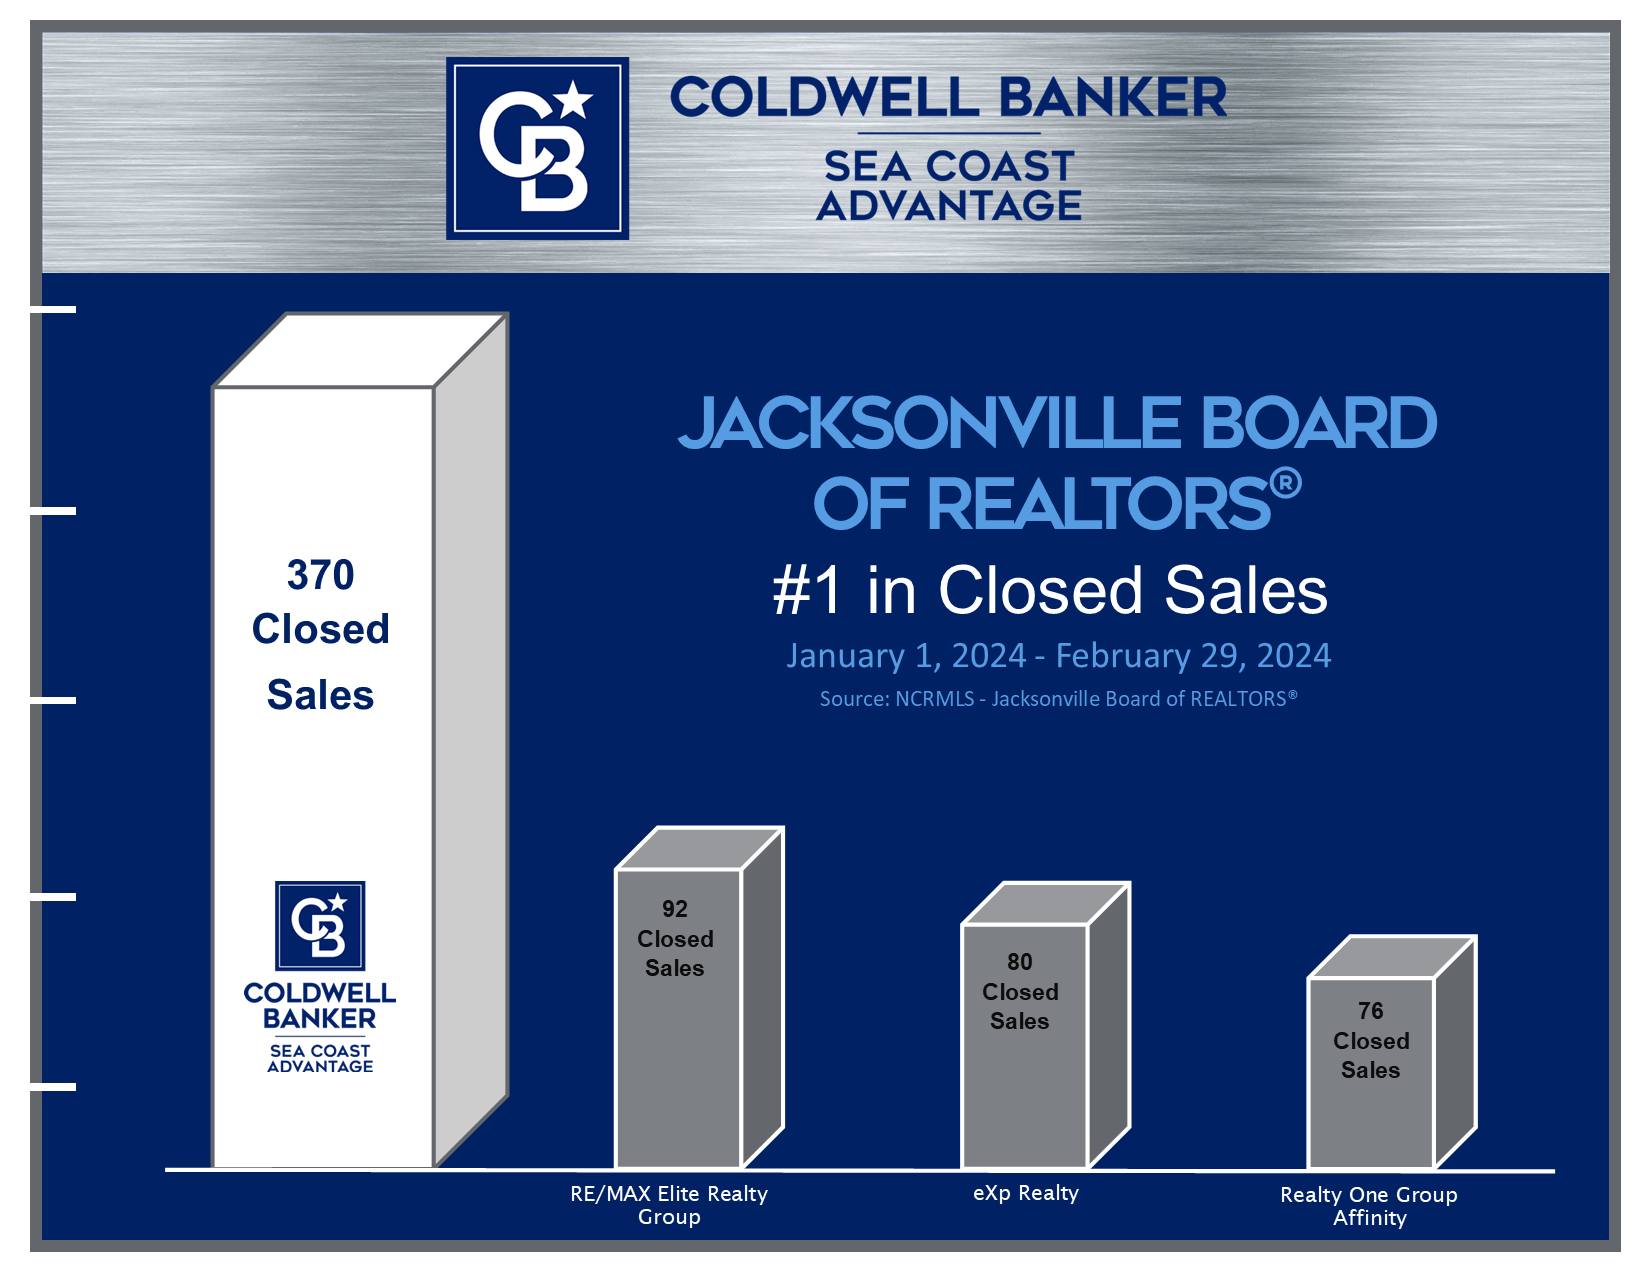 Wildflower Realty Group - Coldwell Banker Sea Coast Advantage